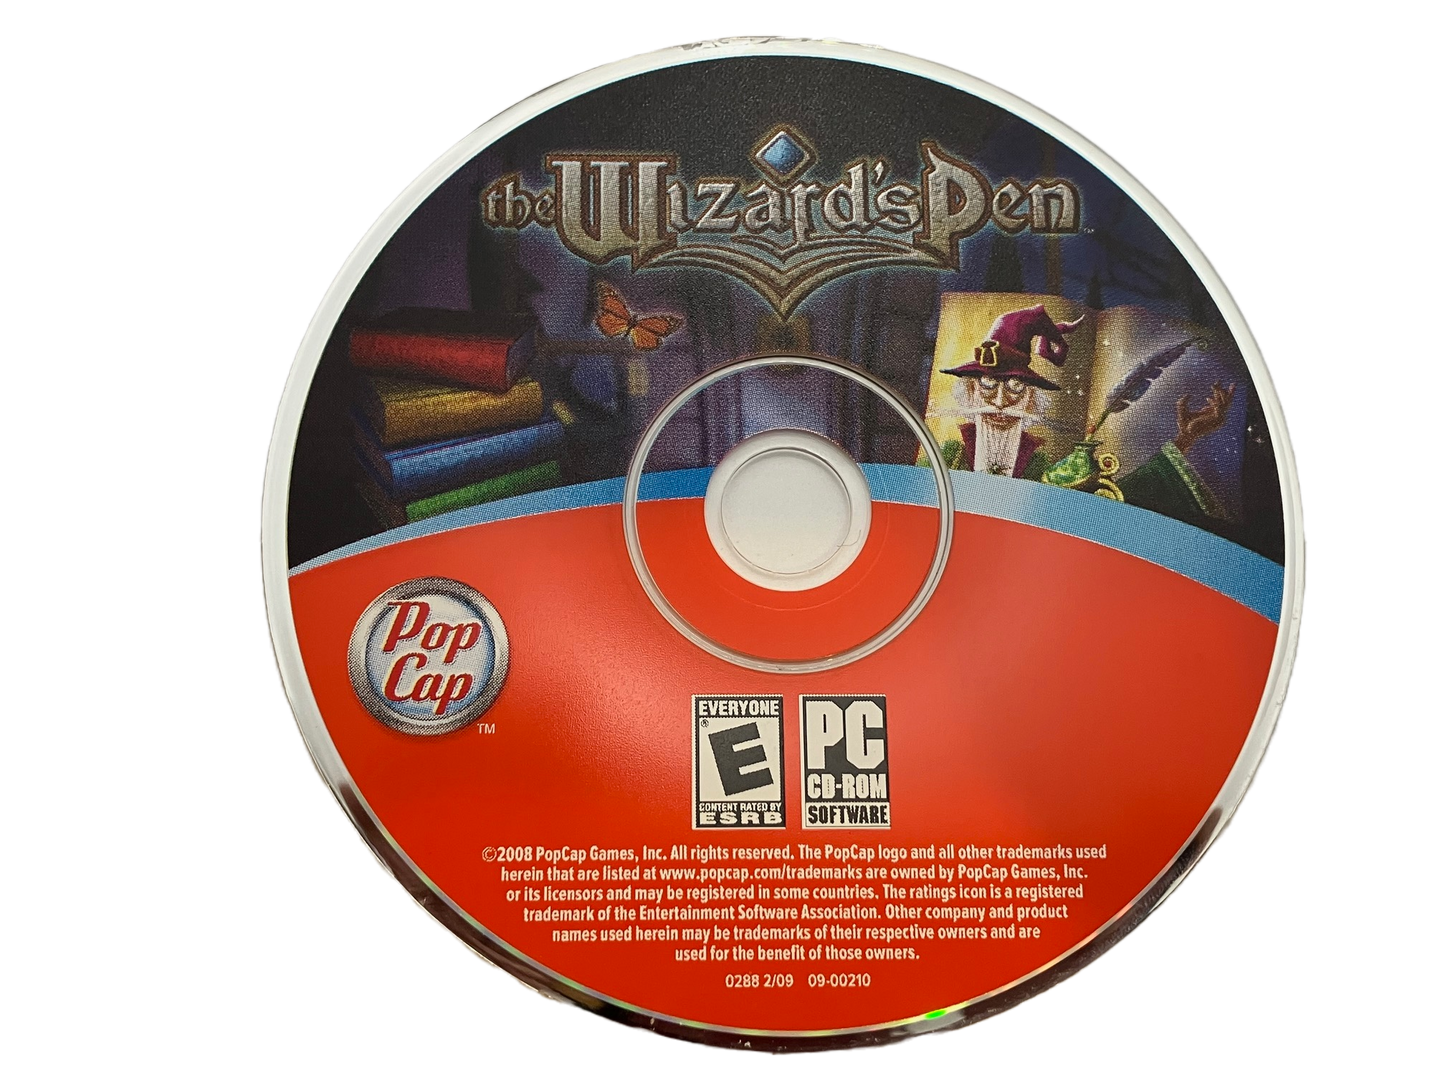 The Wizards Pen PC CD Rom Game Disc Only.